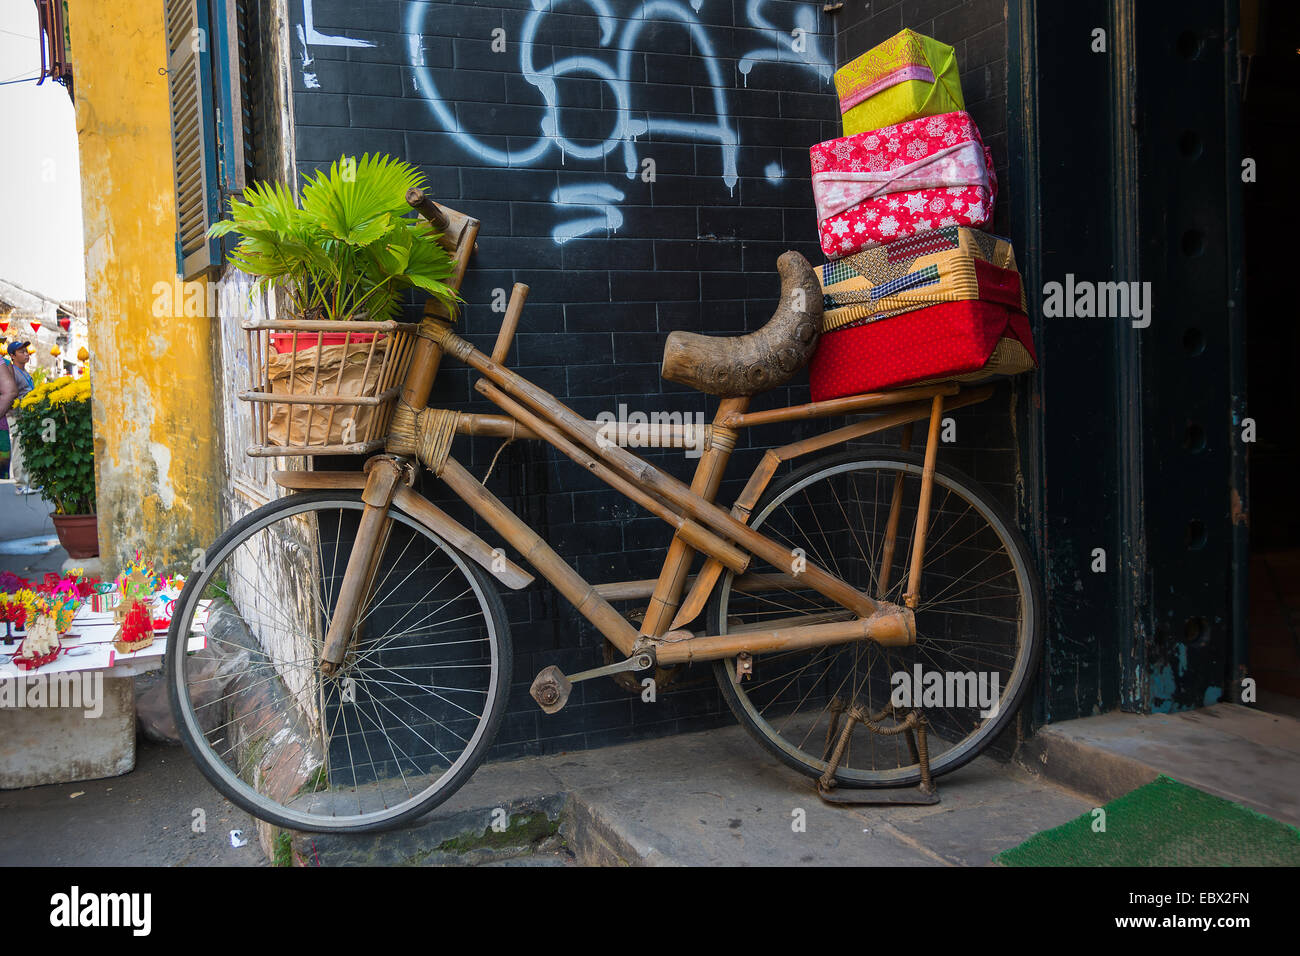 Handmade bamboo bicycle with gift wrapped parcels Stock Photo